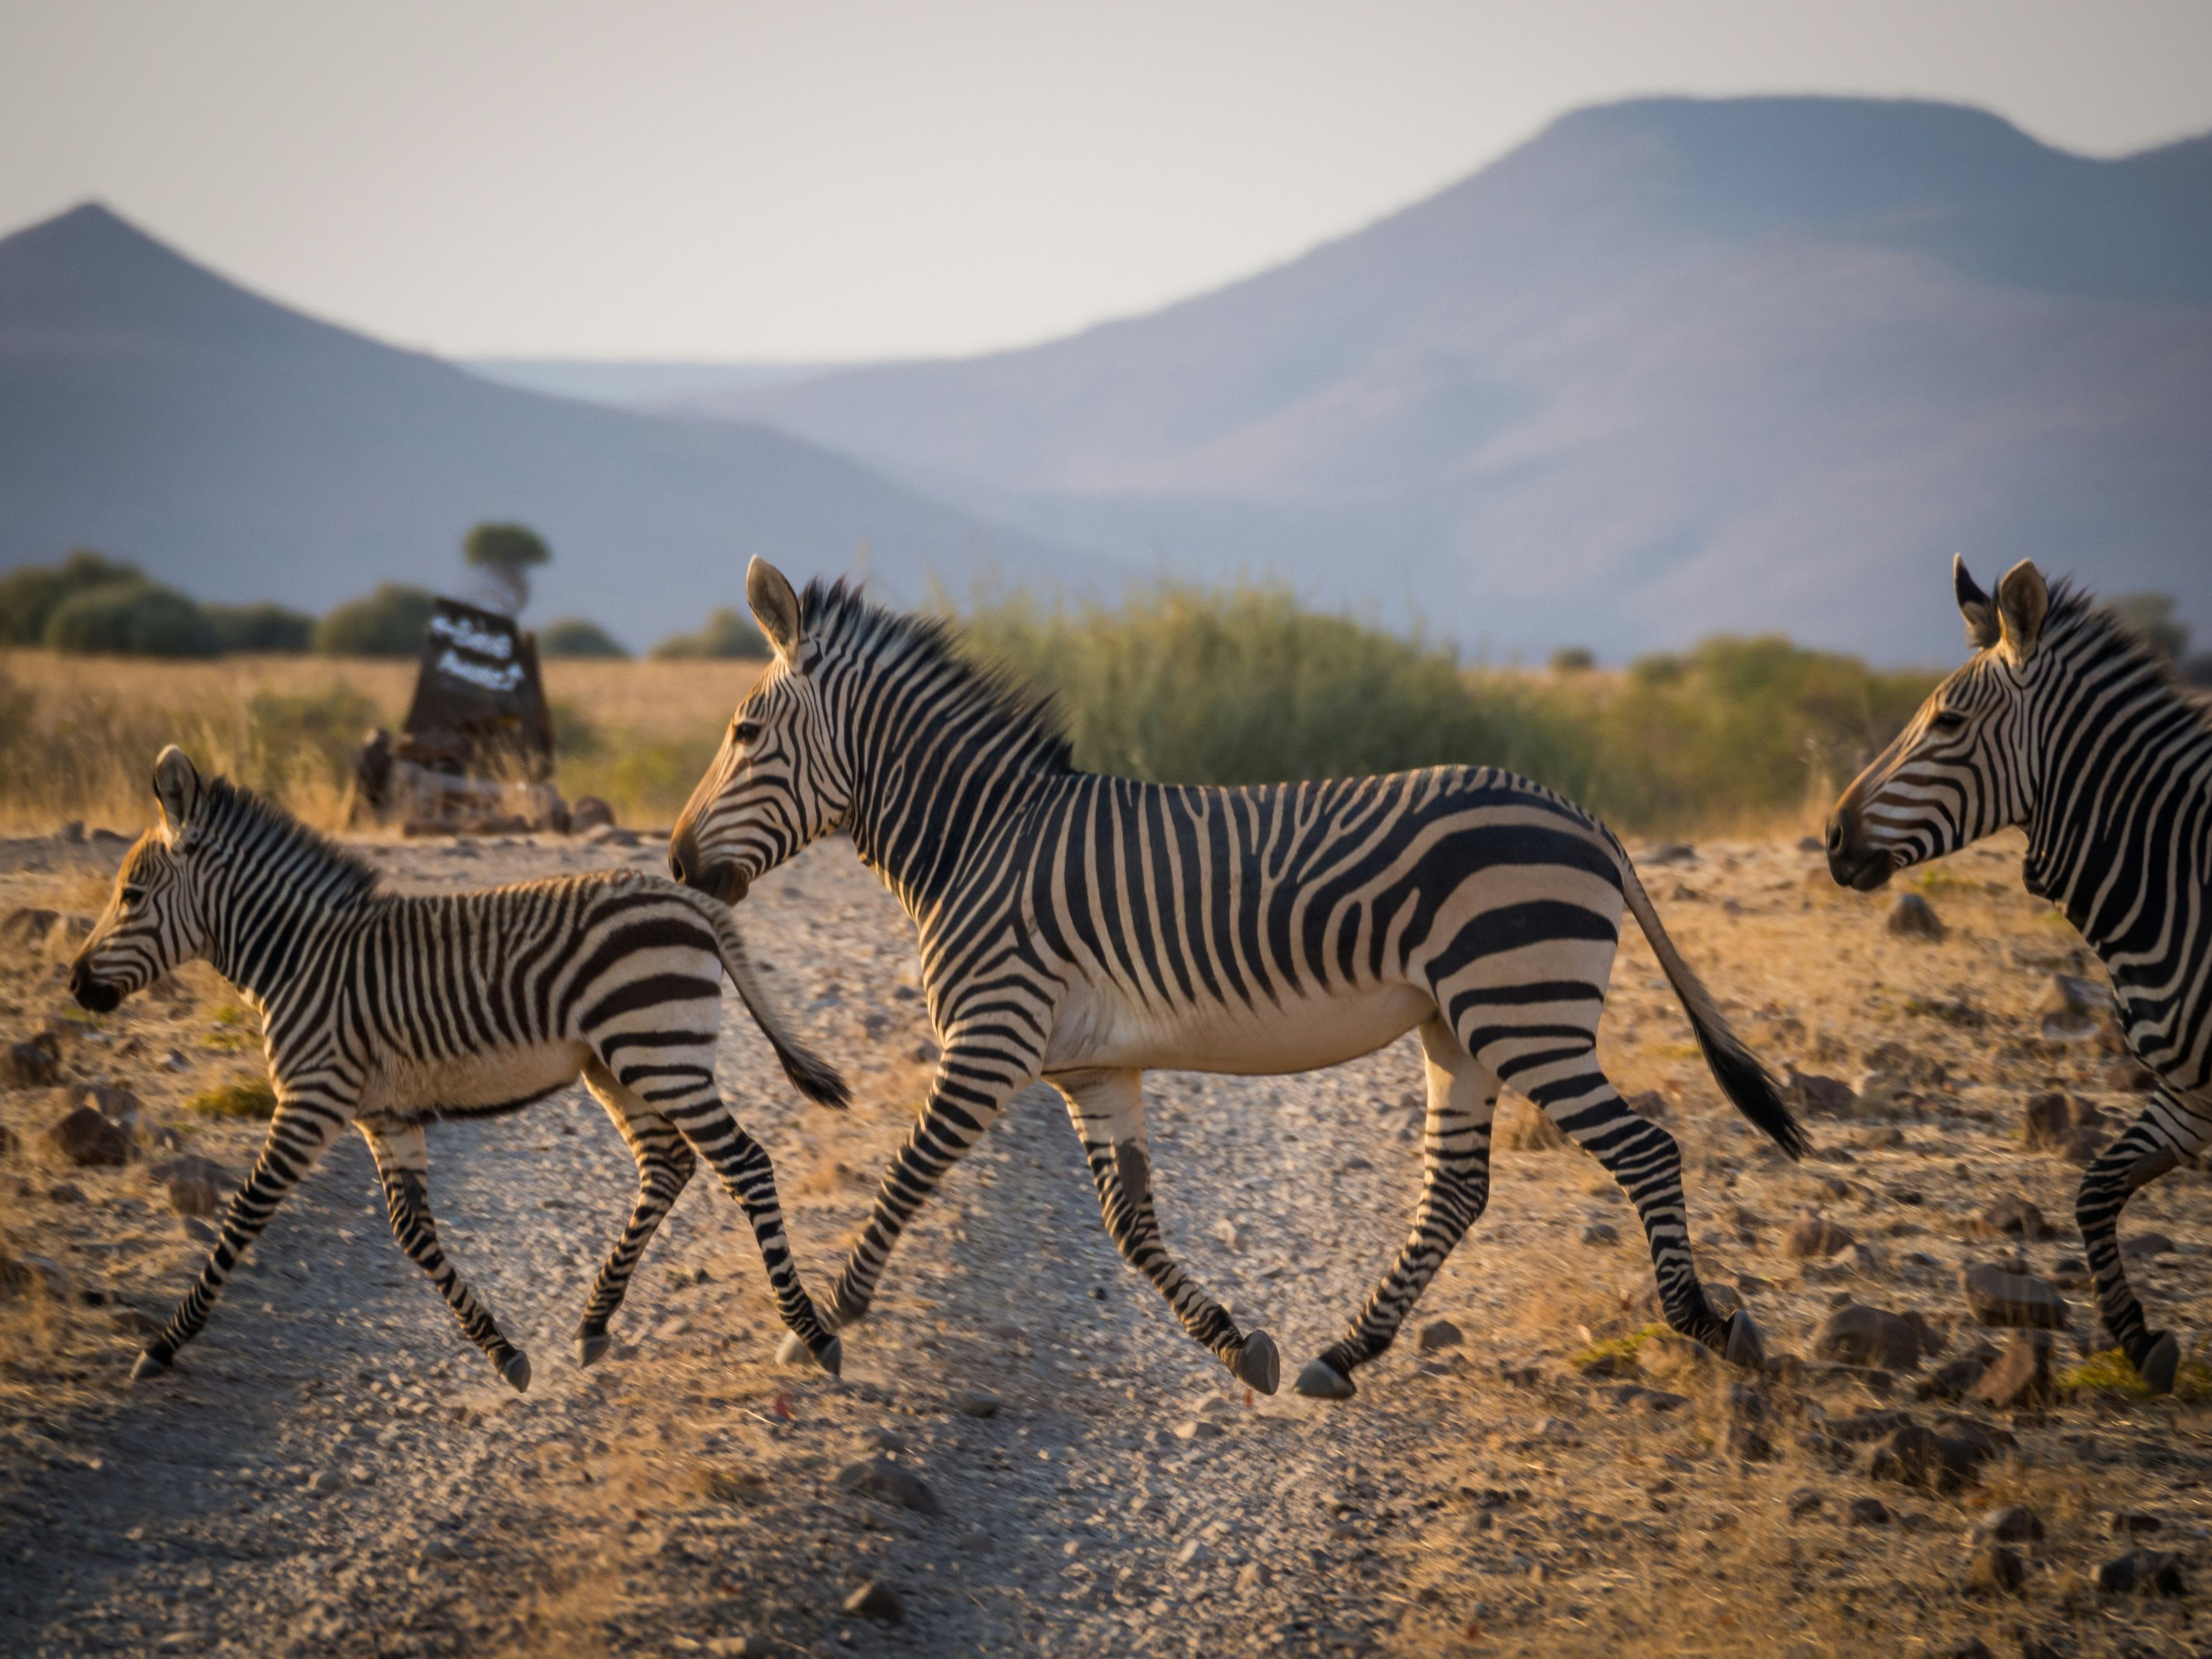 Three zebras run across a dirt track as the sun sets in Namibia.